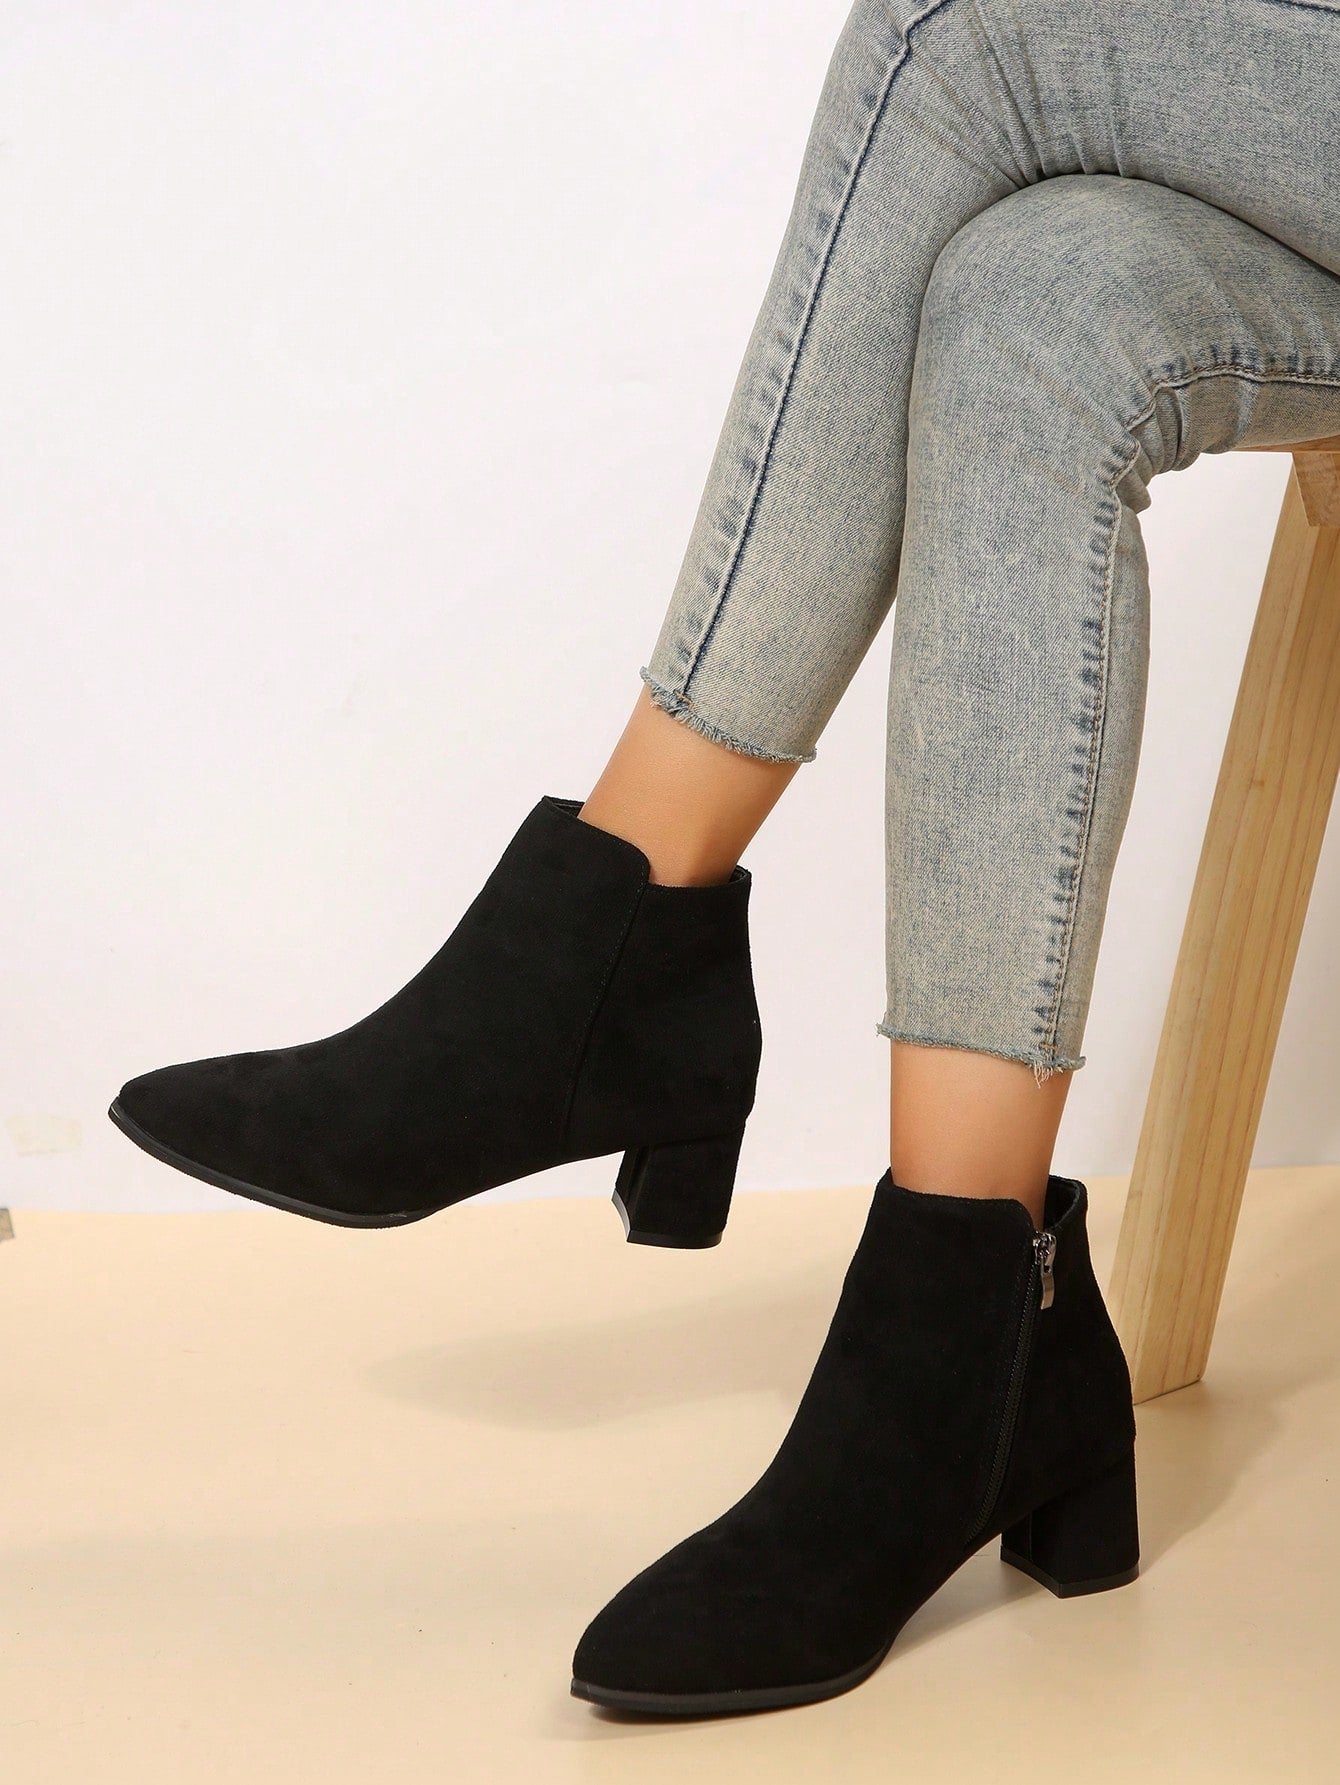 Fashionable Boots For Women-Black-1